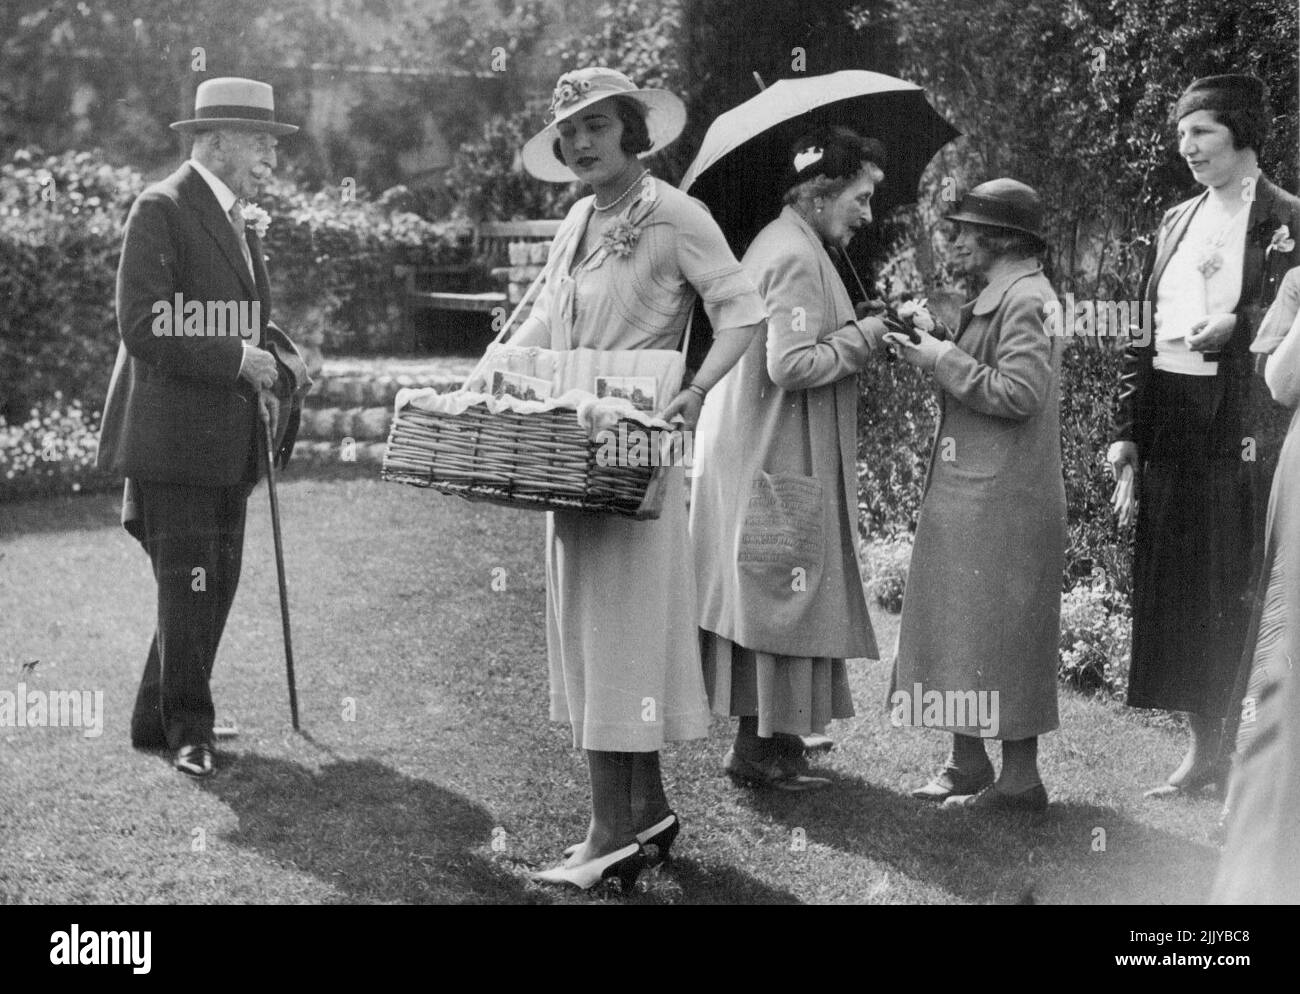 Princess Ingrid Sells Lavender Bags. -- Princess Ingrid selling buttonholes. The Duke is also seen and Princess Louise, talking to a visitor. The Duke of Connaught on Easter Sunday, opened to the public, the beautiful gardens of his vills 'Les Bruyeres' at St. Jean, Cap Ferrat. Princess Ingrid accompanied by the Princess Louise, the Duke's sister, was busy selling bags of lavender in aid of the Queen Victoria Hospital at Mont Boron. May 29, 1933. (Photo by Central News). Stock Photo